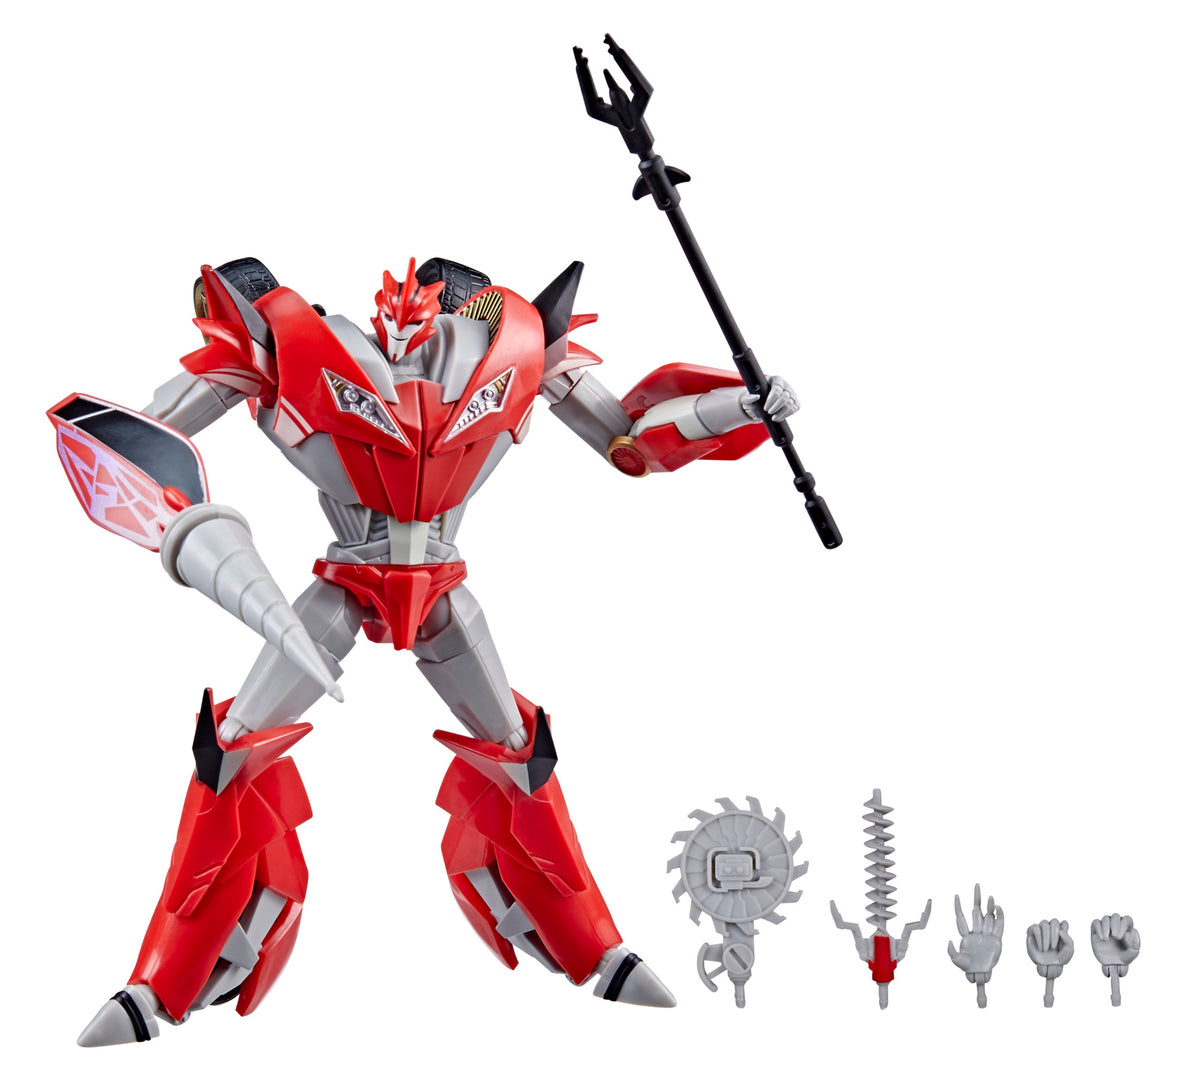 Transformers RED Prime Knock Out In-Hand Images